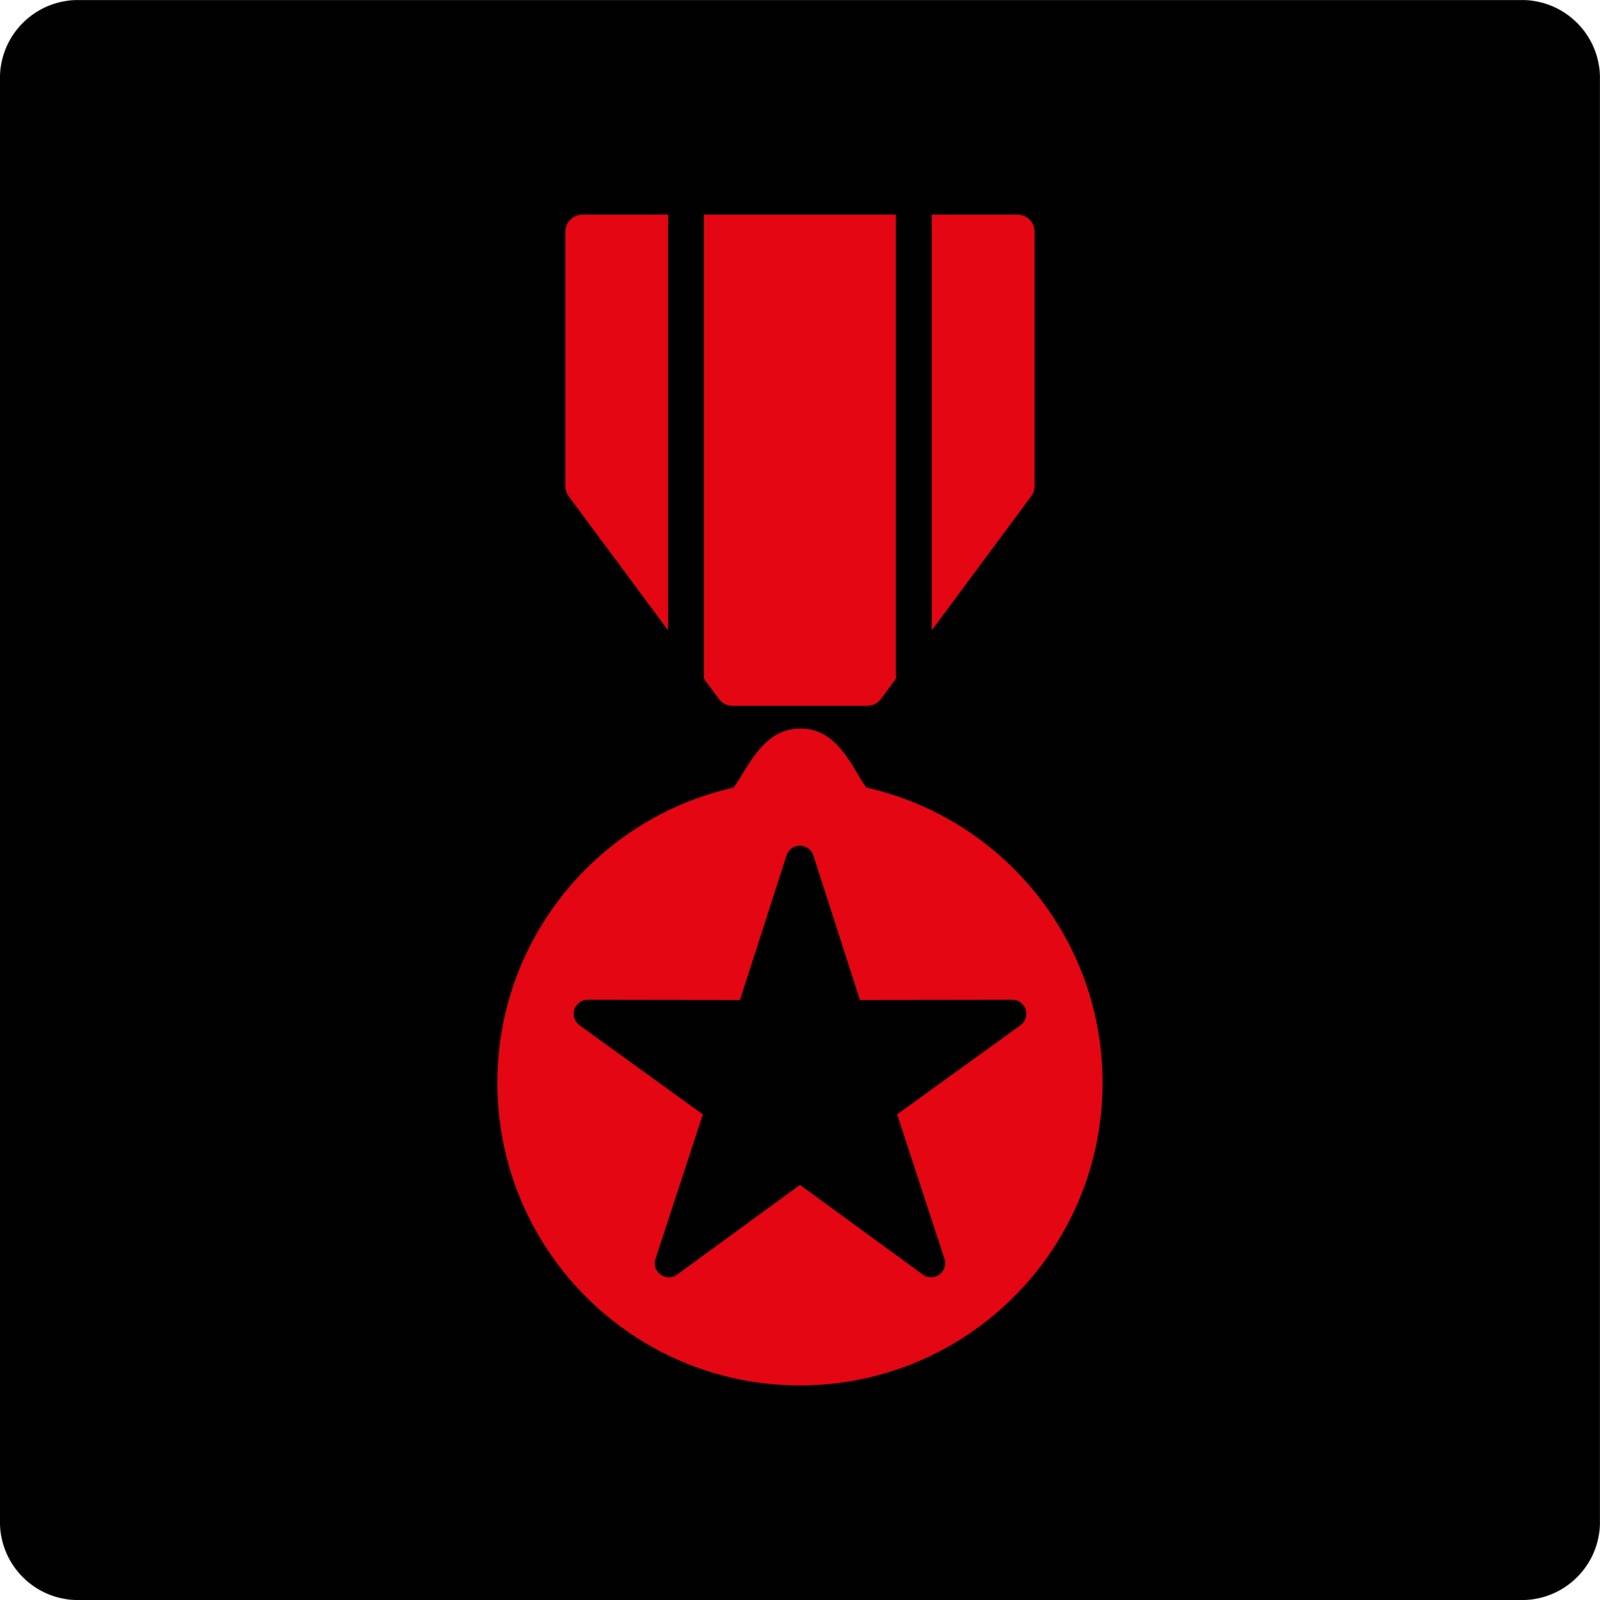 Army award icon from Award Buttons OverColor Set. Icon style is intensive red and black colors, flat rounded square button, white background.